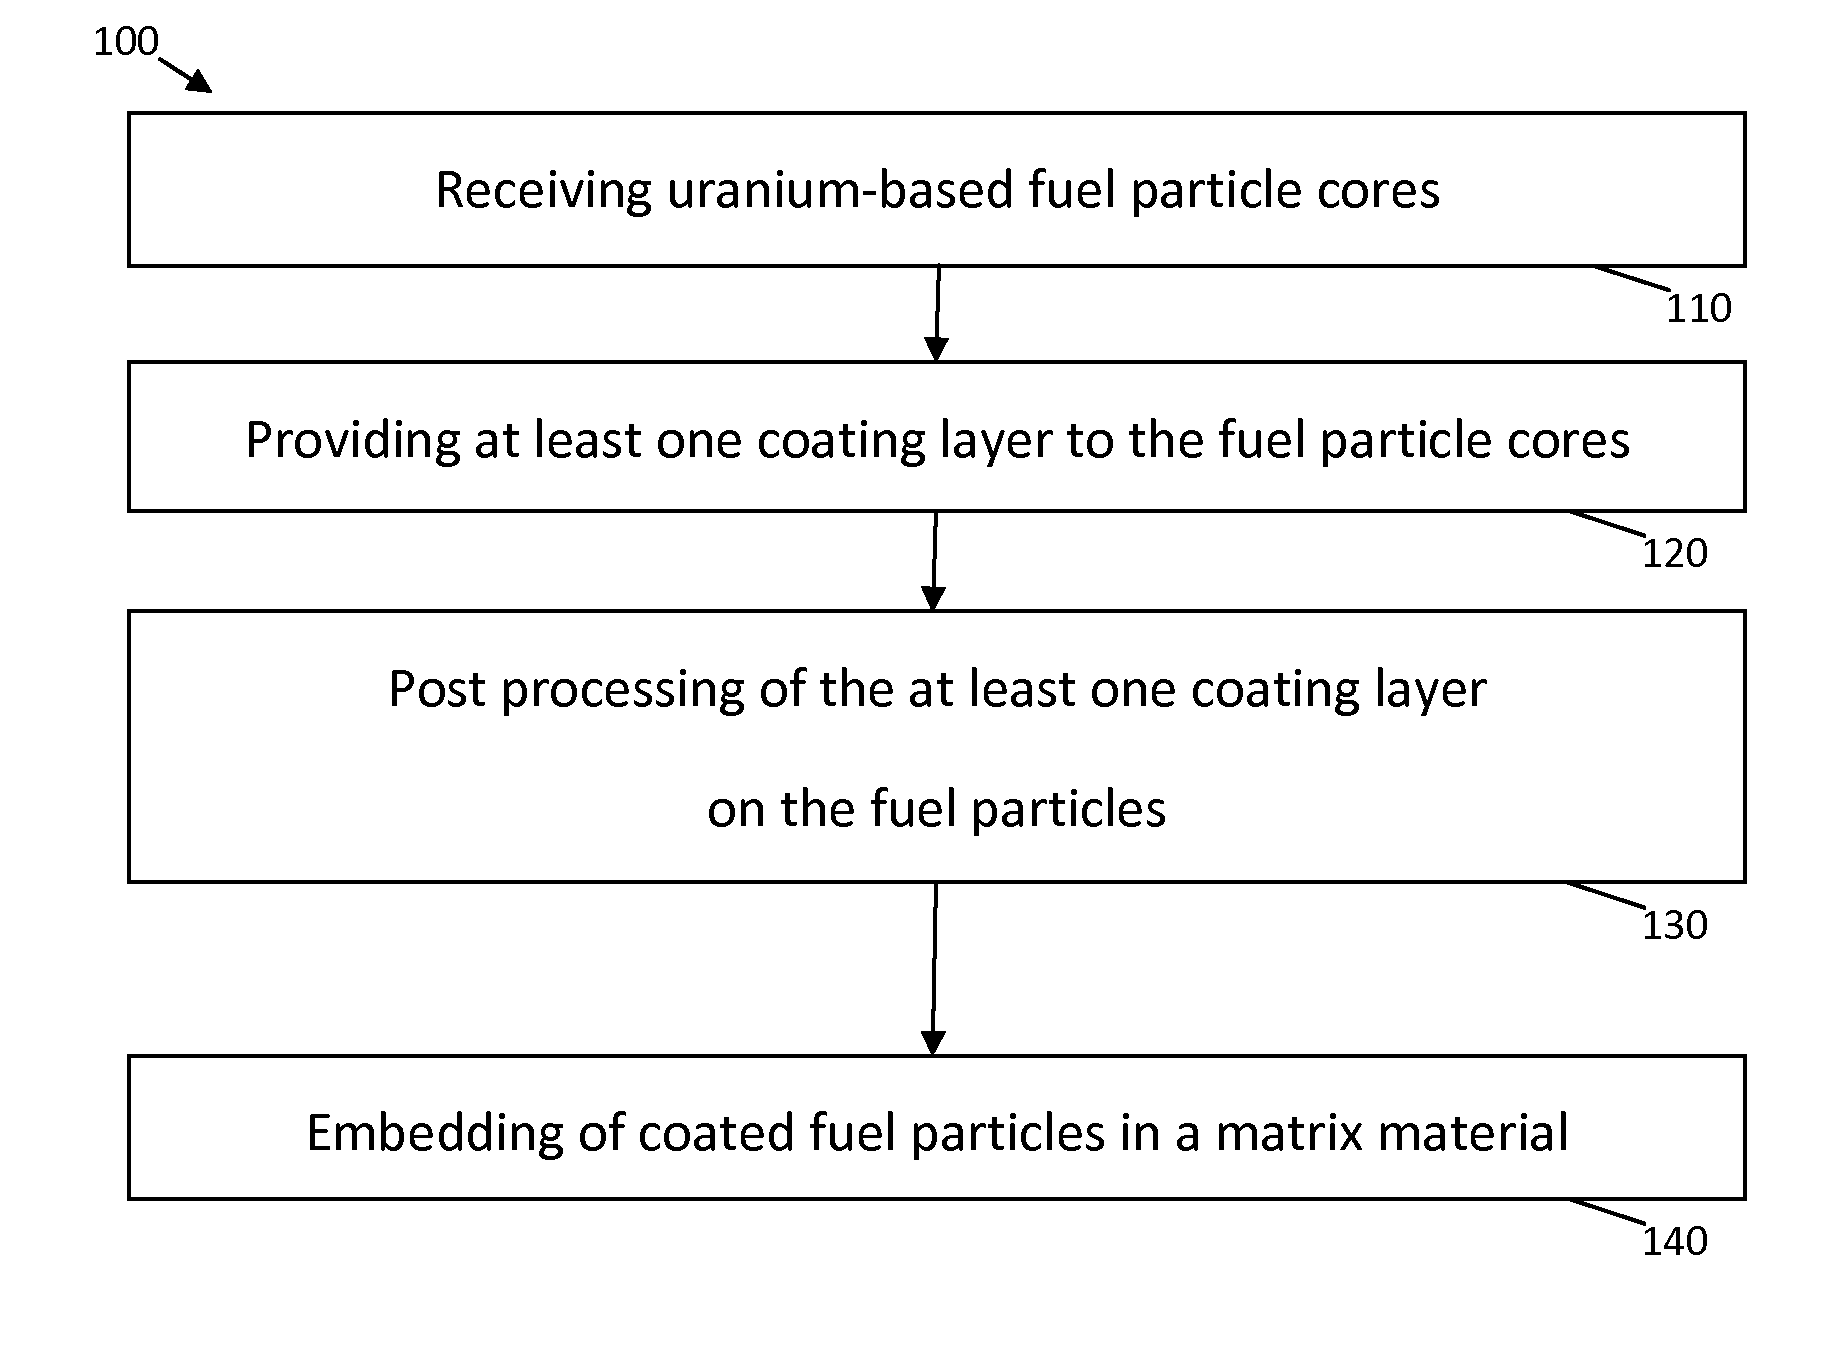 Coated nuclear reactor fuel particles